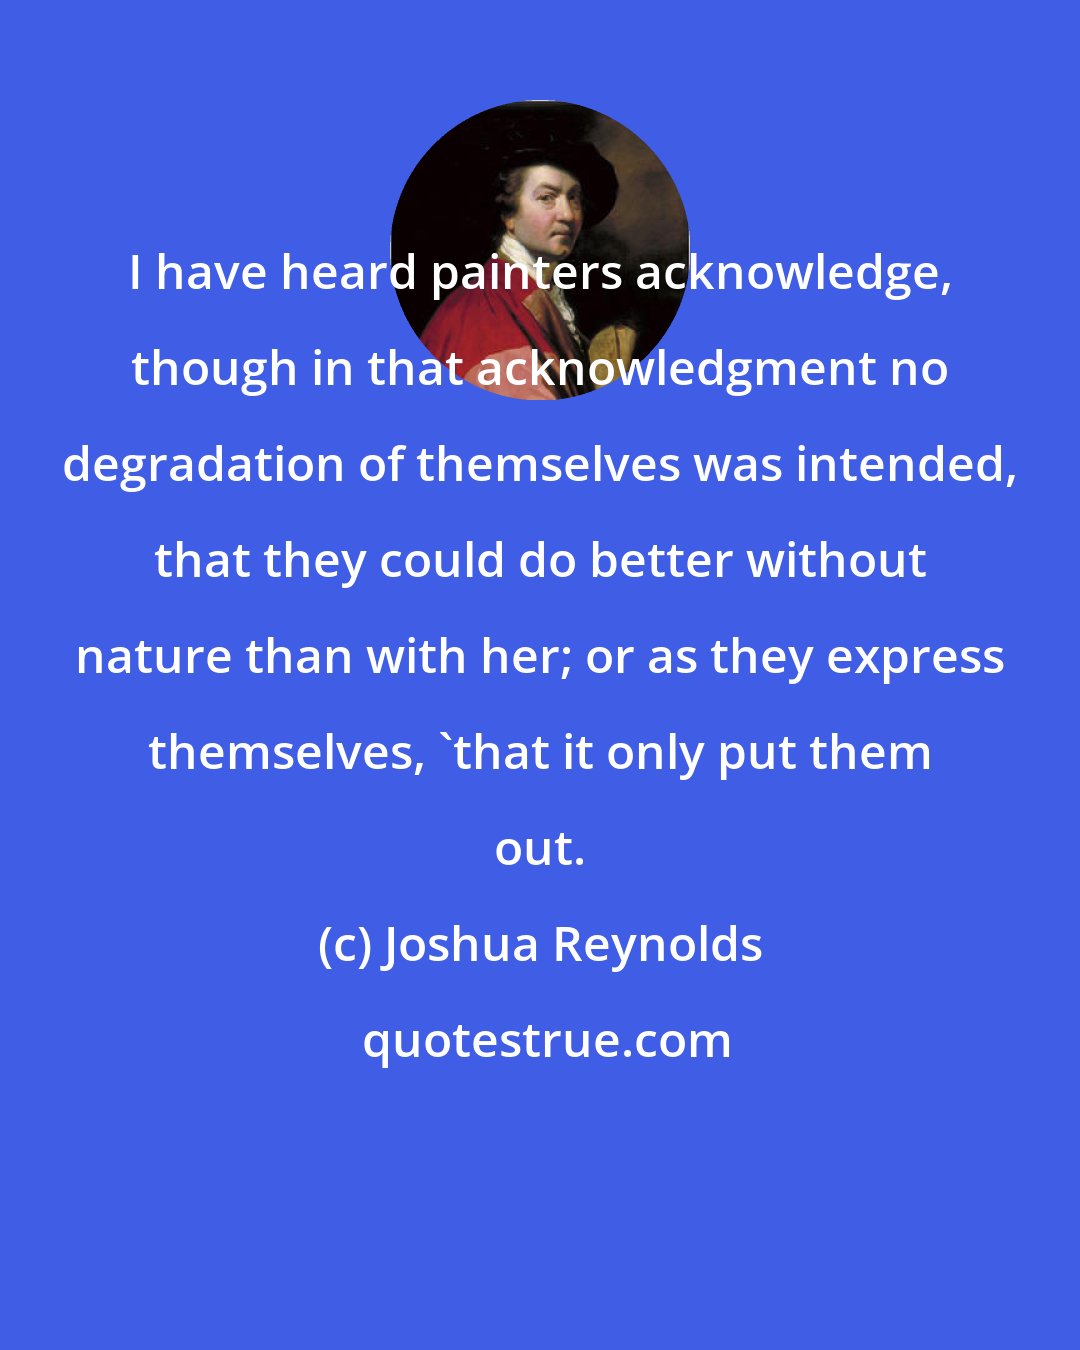 Joshua Reynolds: I have heard painters acknowledge, though in that acknowledgment no degradation of themselves was intended, that they could do better without nature than with her; or as they express themselves, 'that it only put them out.